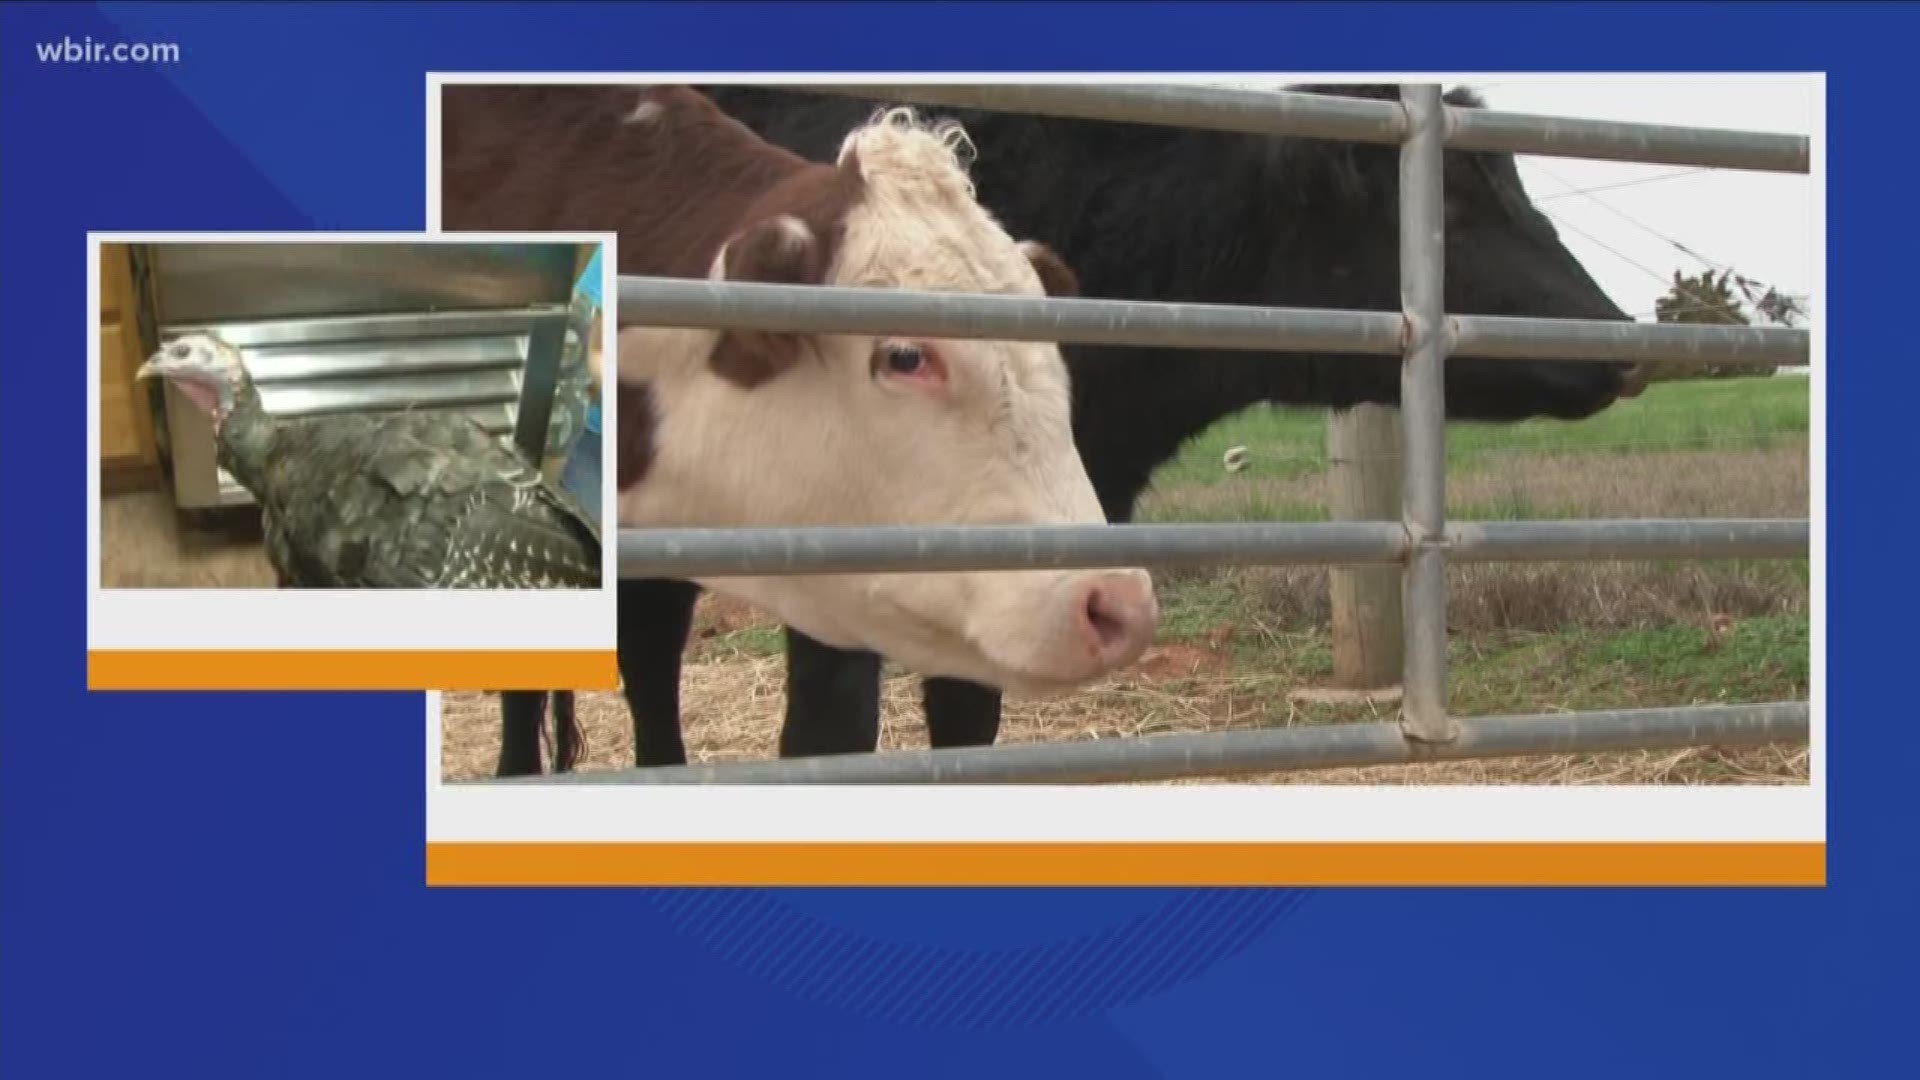 The animal sanctuary is moving to a larger space in Middle Tennessee.